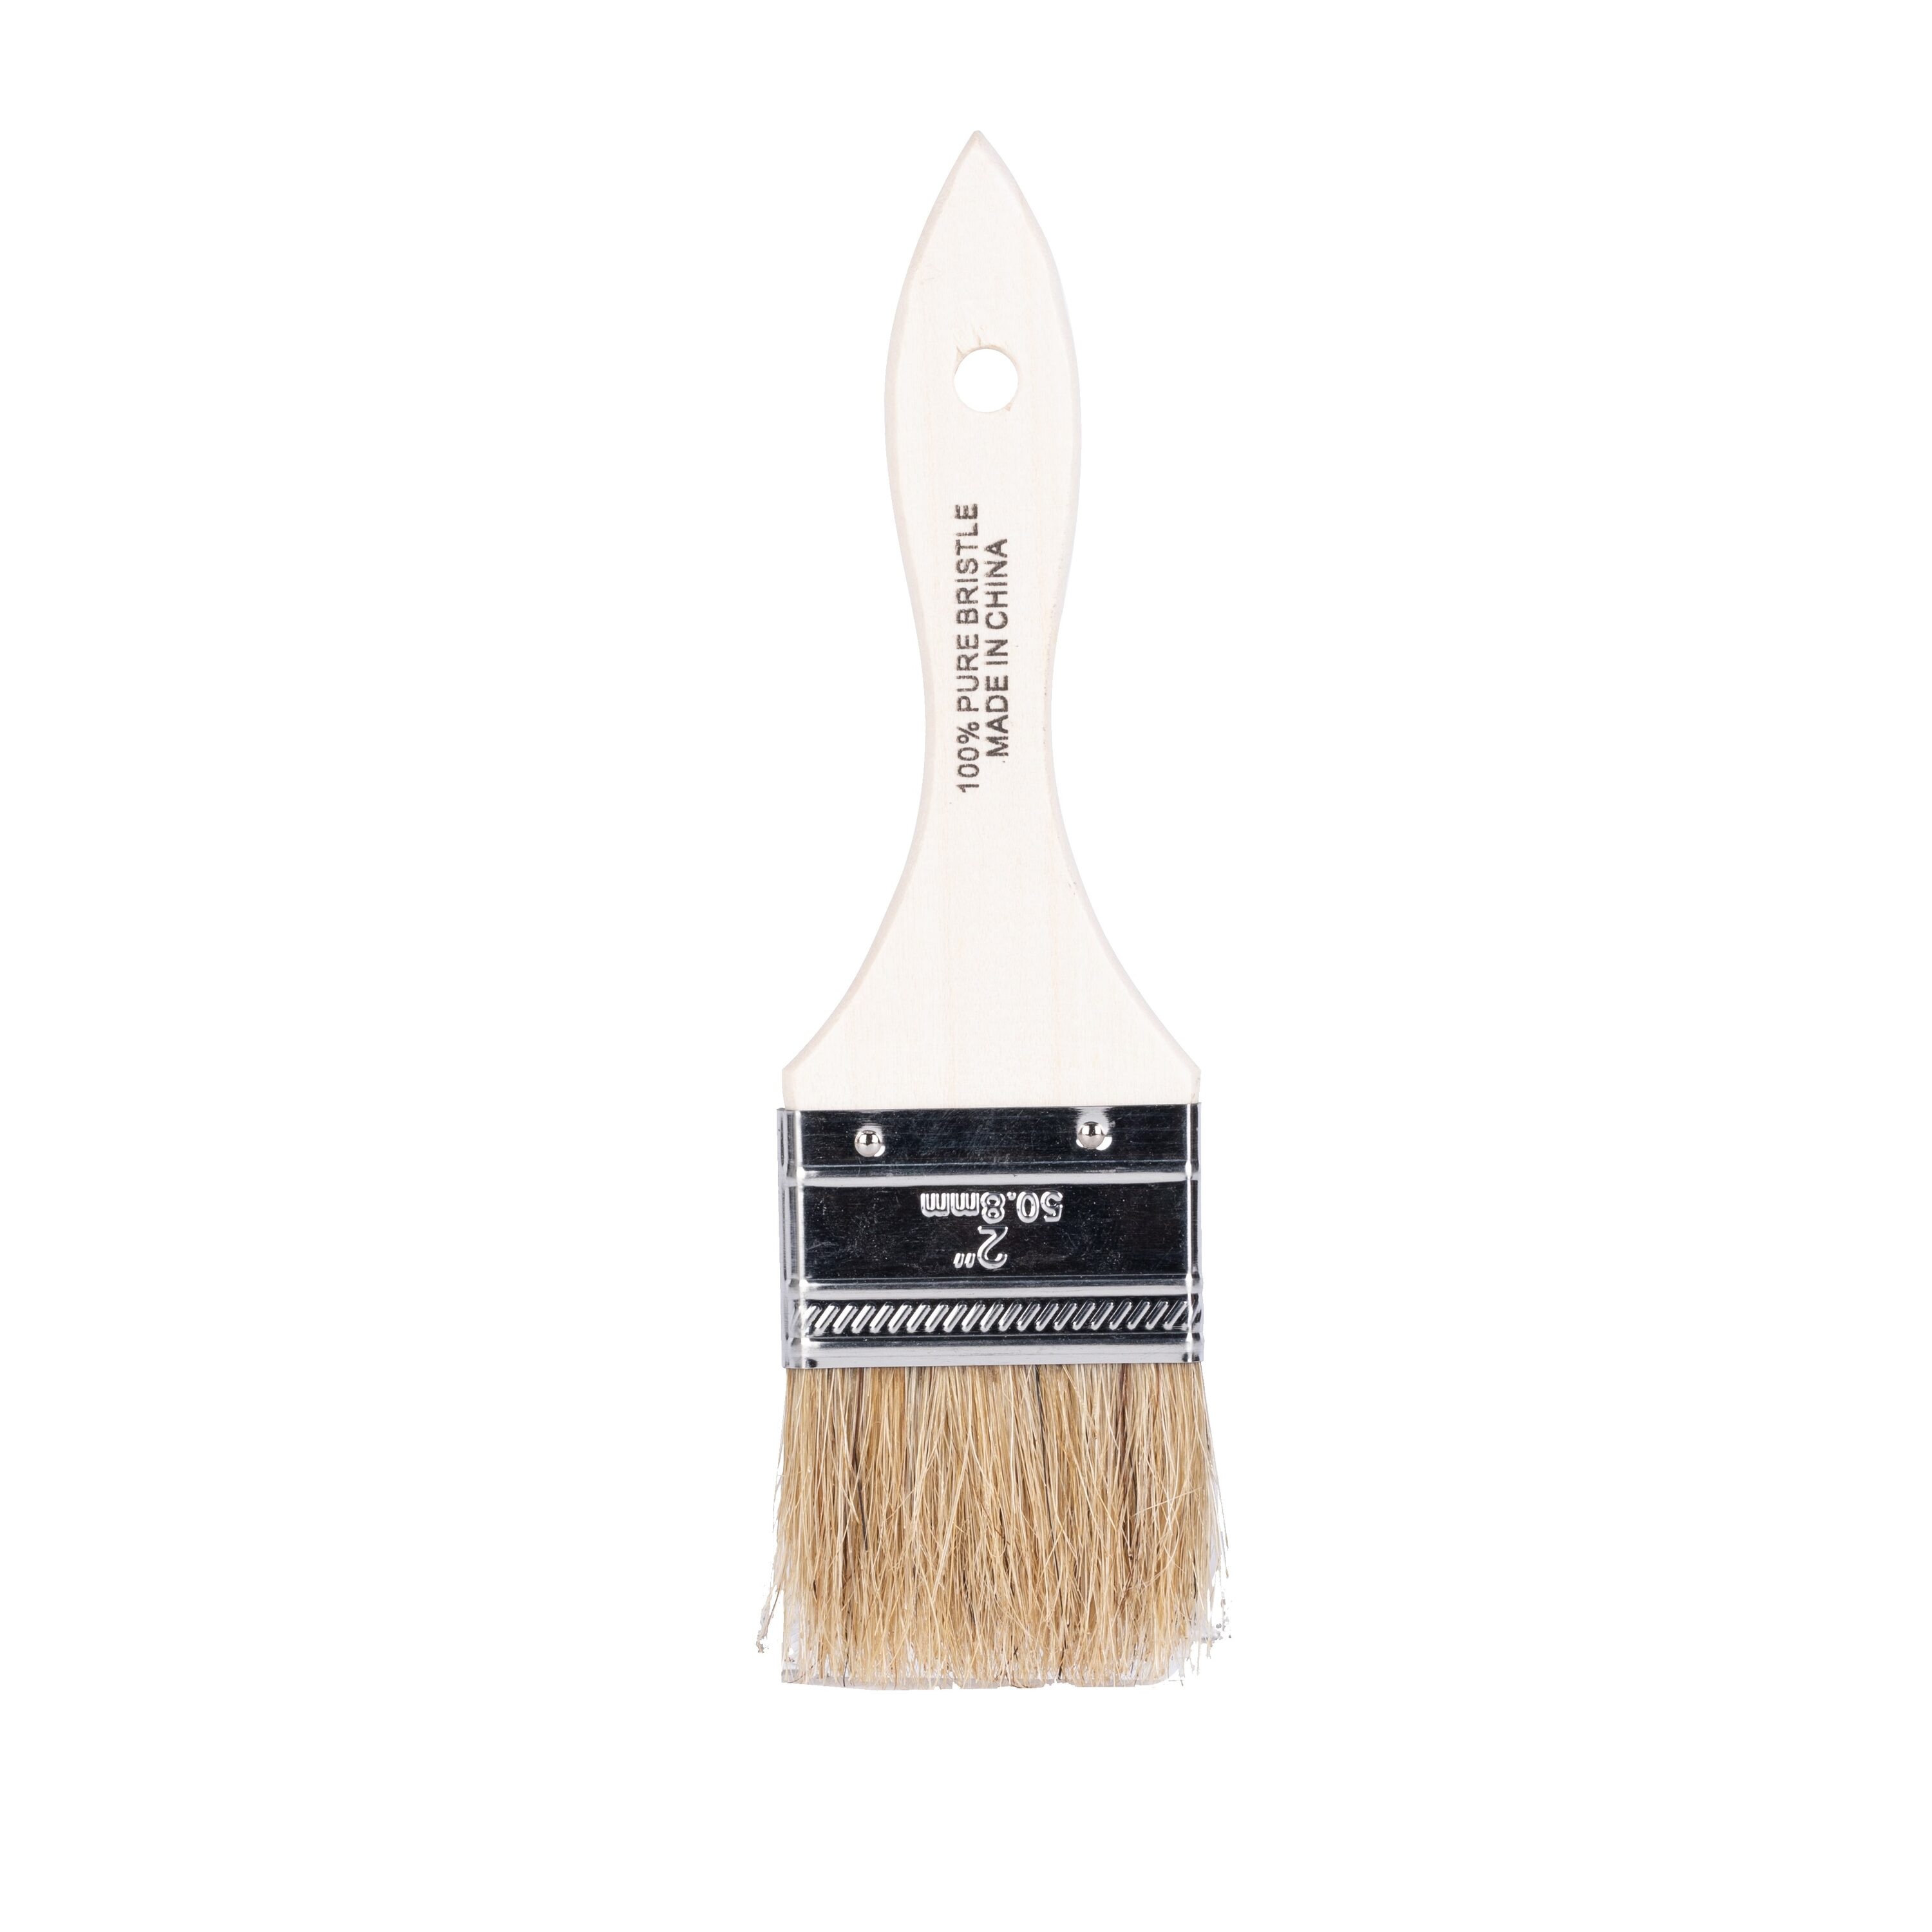 Linzer 2 Wood Oil-Based Stains & Finishes Flat Paint Brush